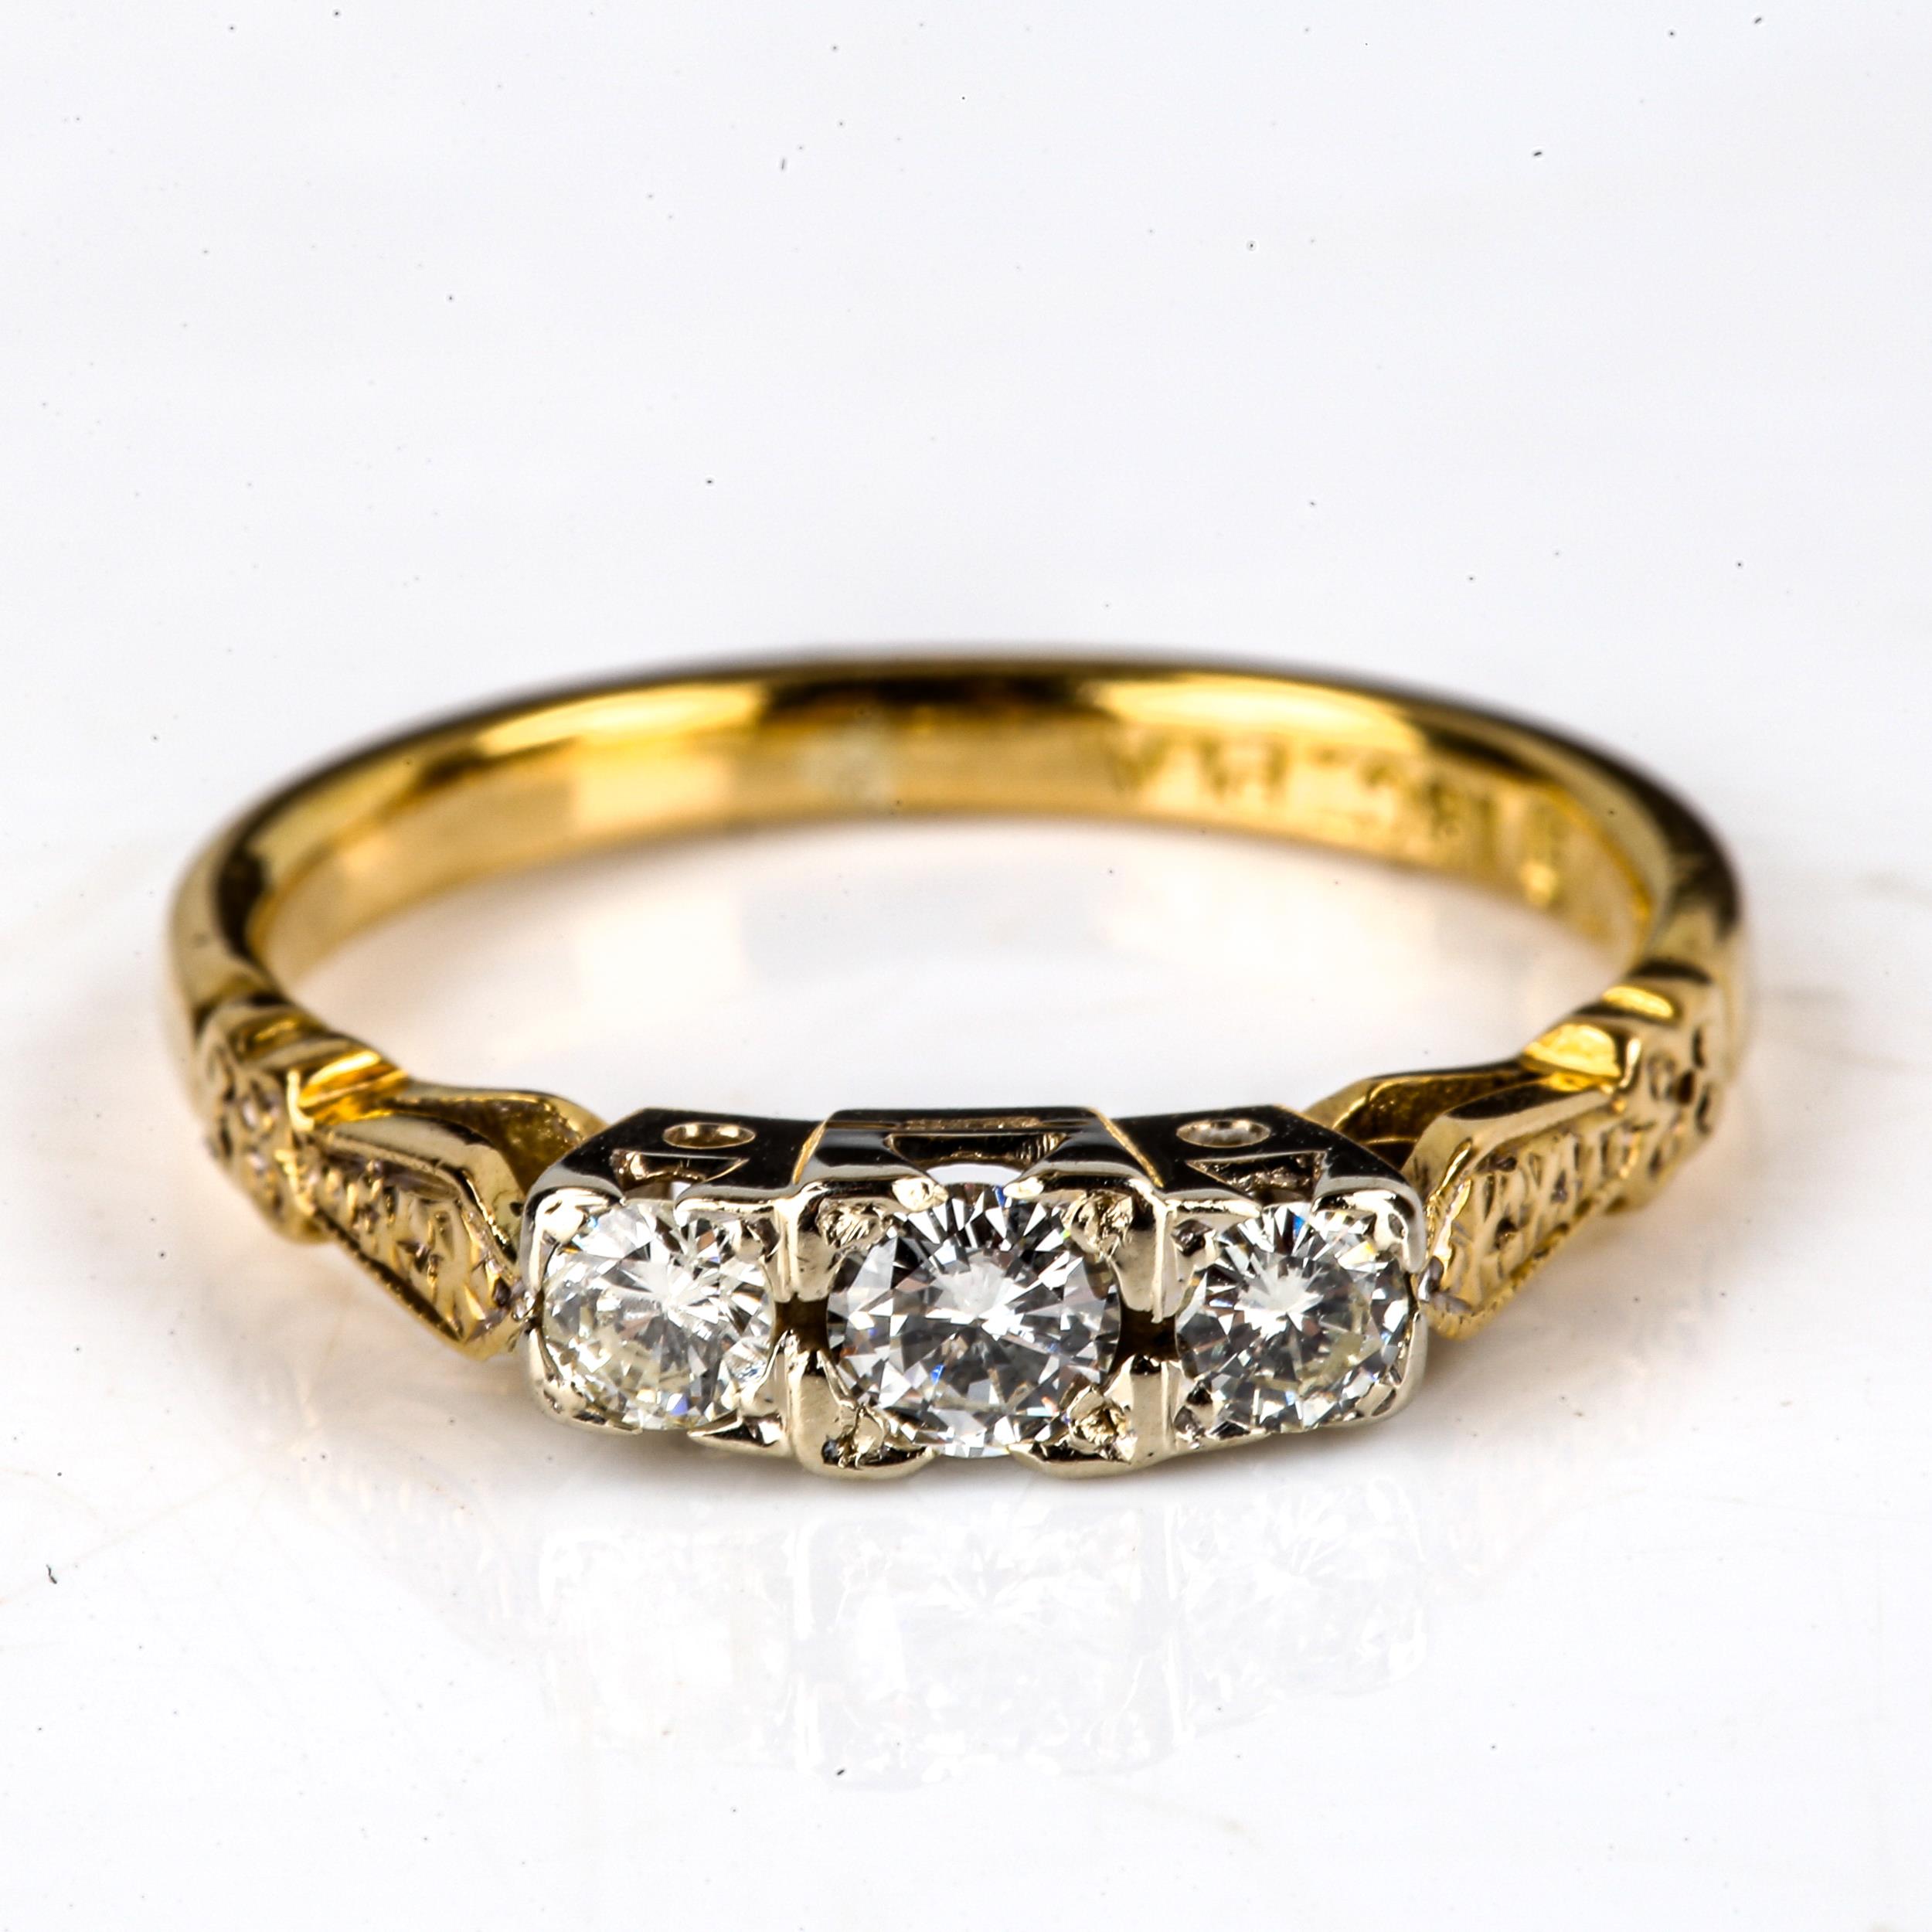 An 18ct gold 3-stone diamond ring, platinum-topped set with modern round brilliant-cut diamonds, - Image 2 of 4